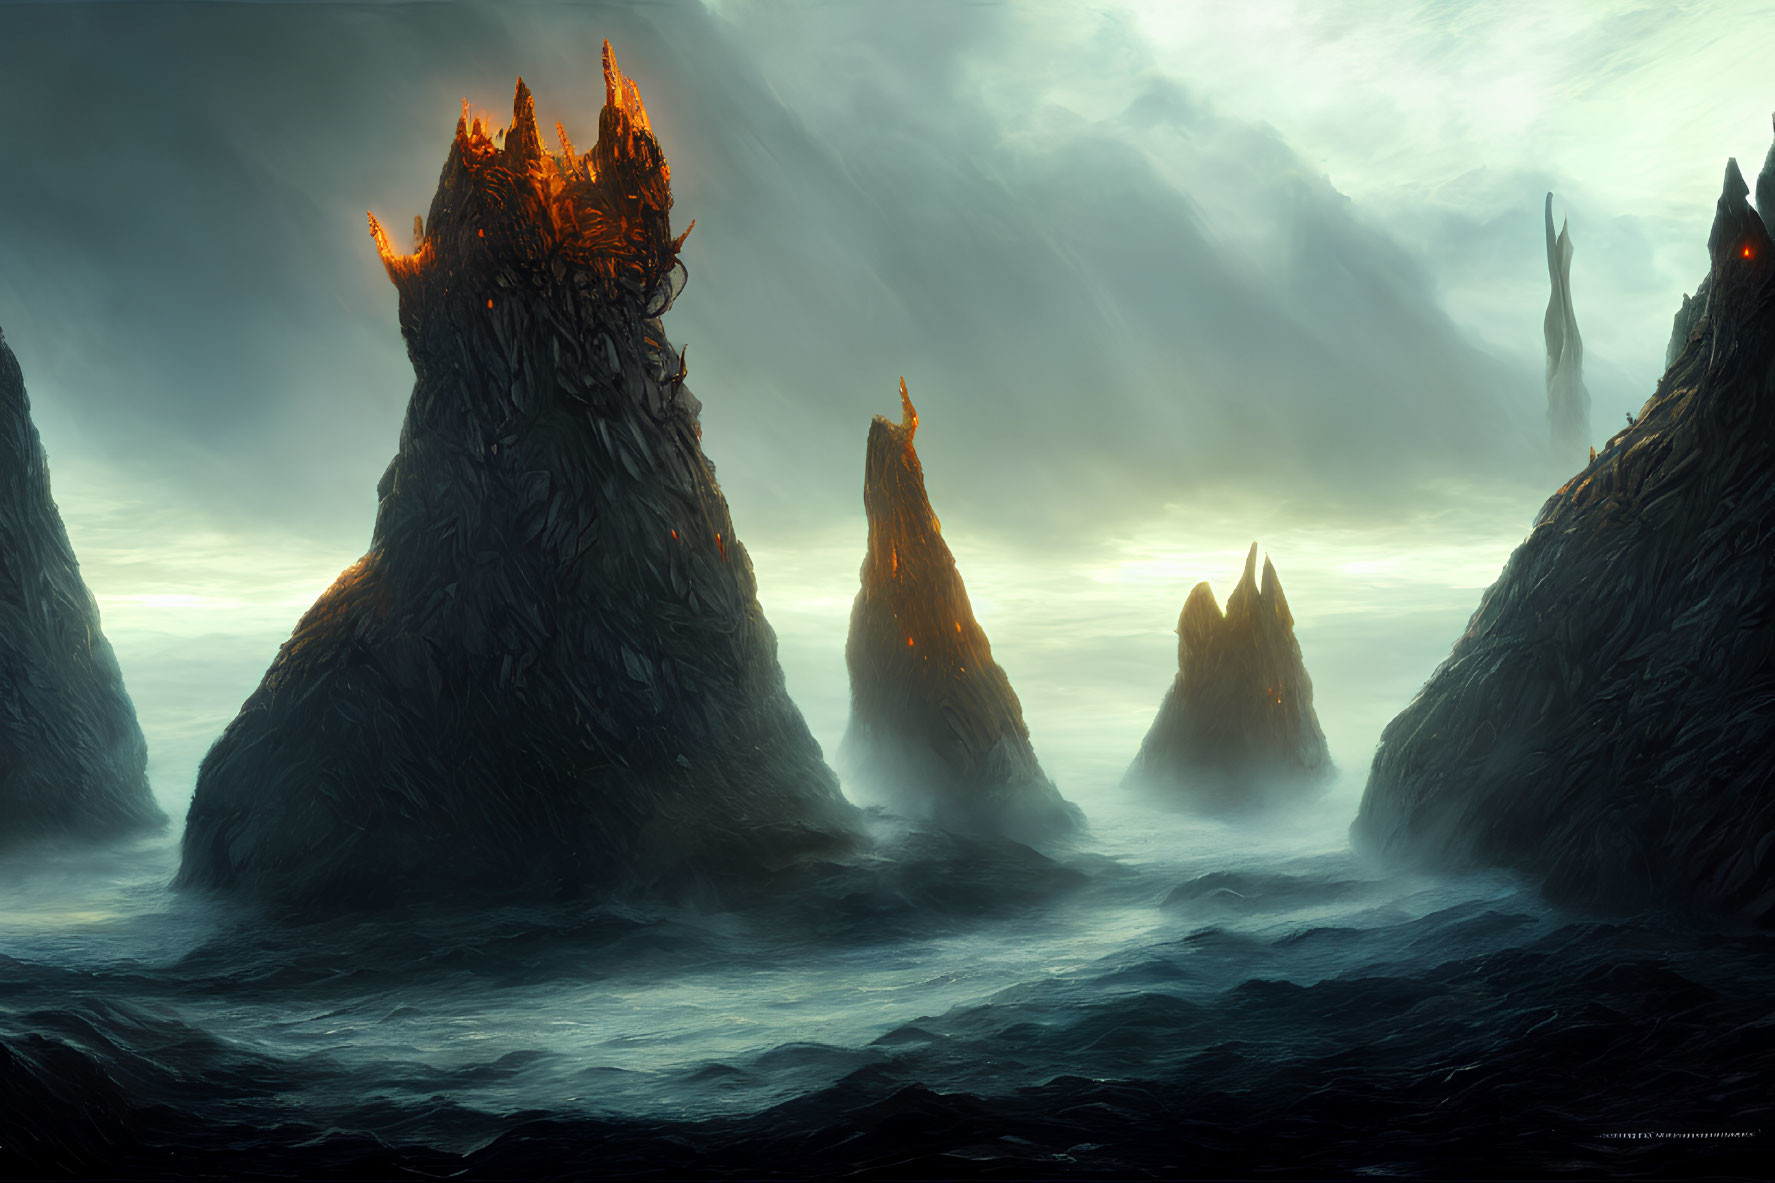 Majestic rocky islets with glowing castle in stormy seascape